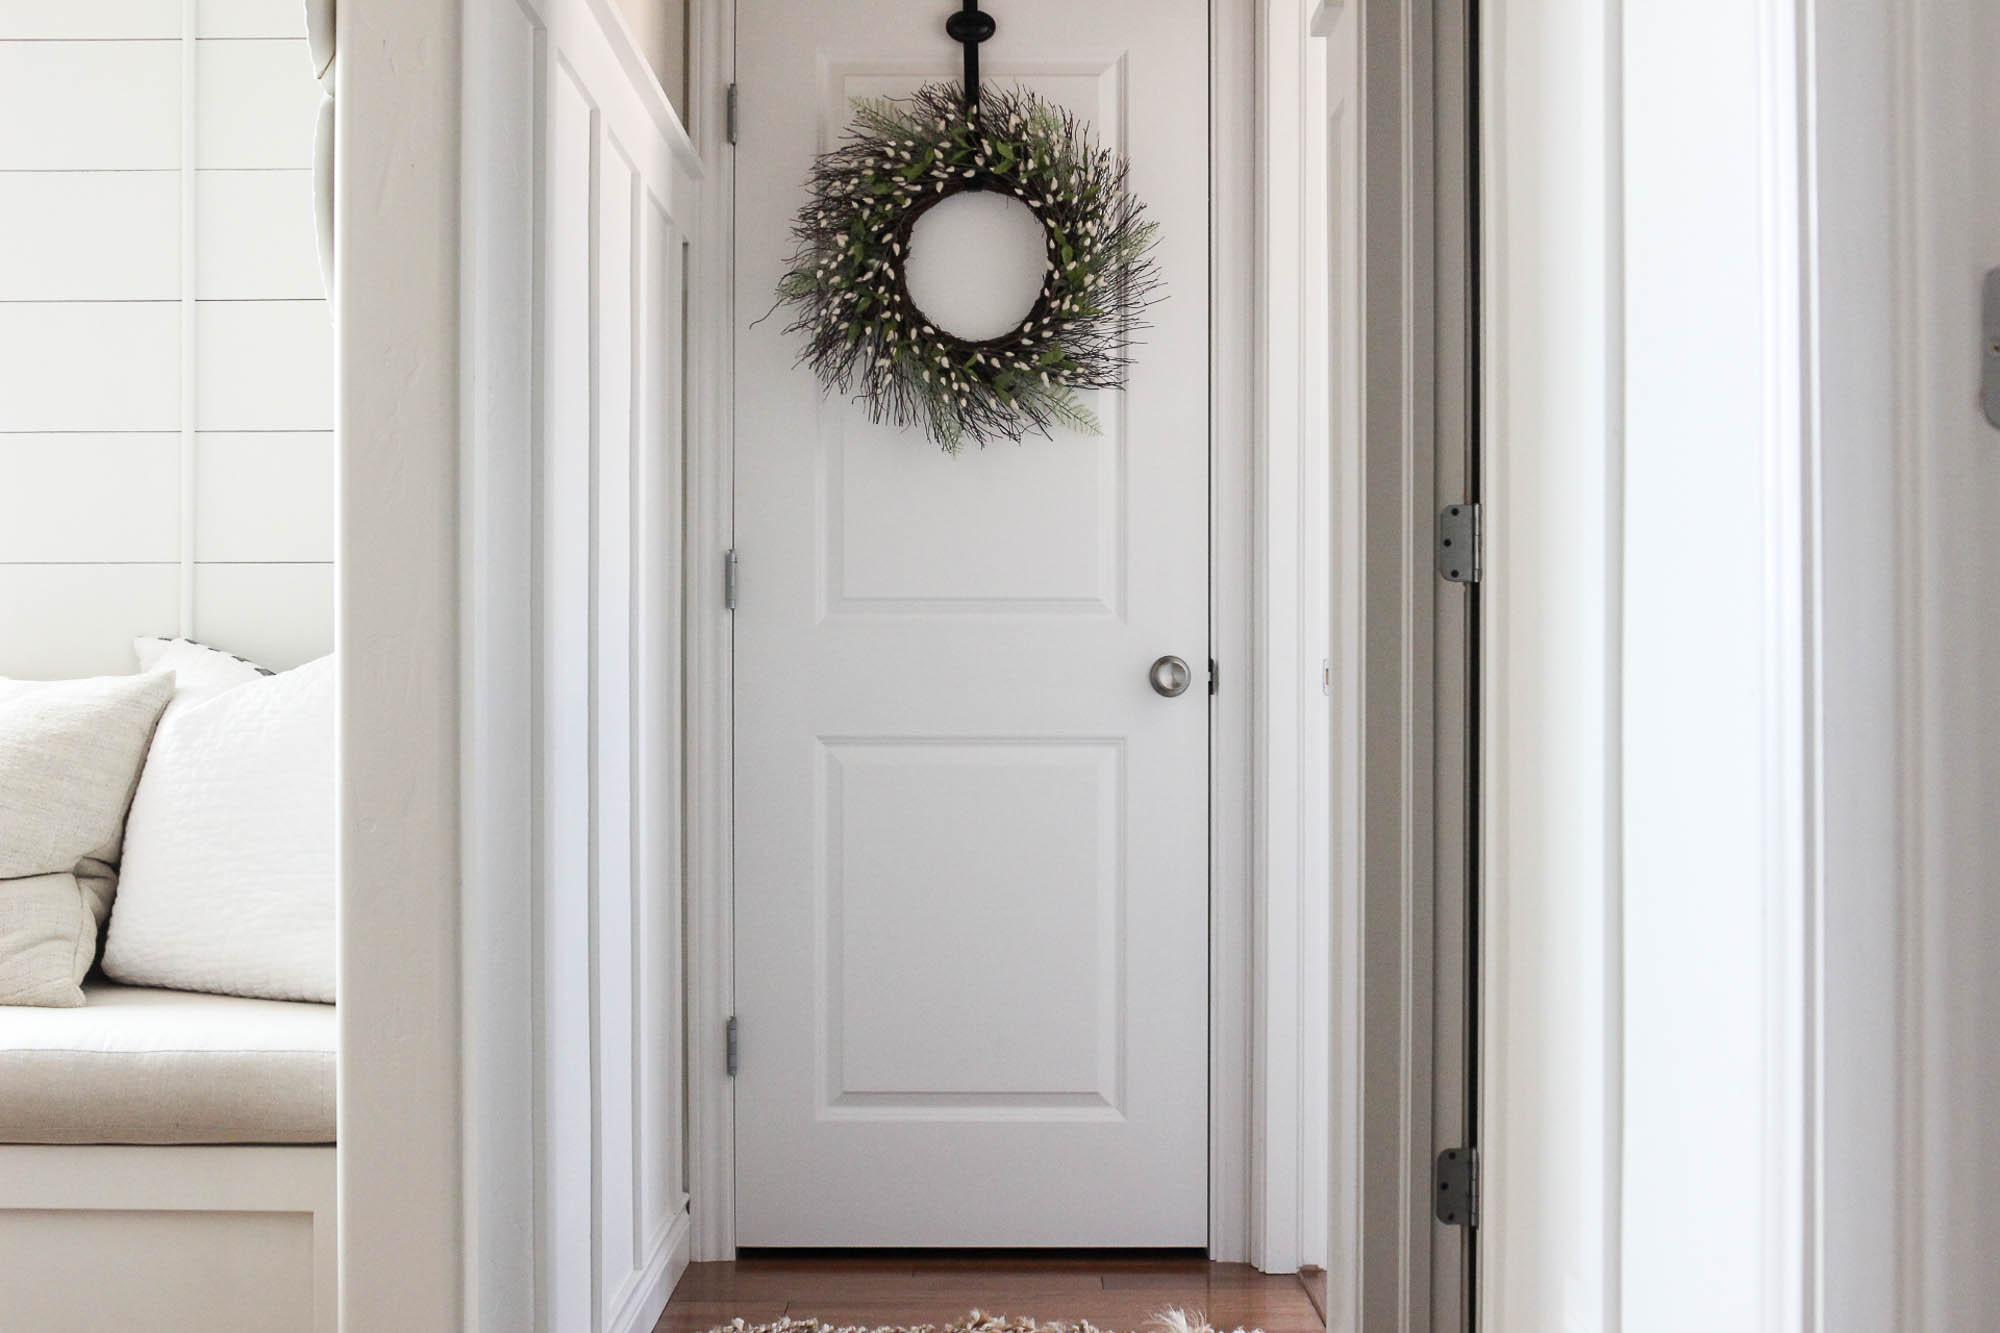 DIY Board And Batten In The Hallway - The Wood Grain Cottage